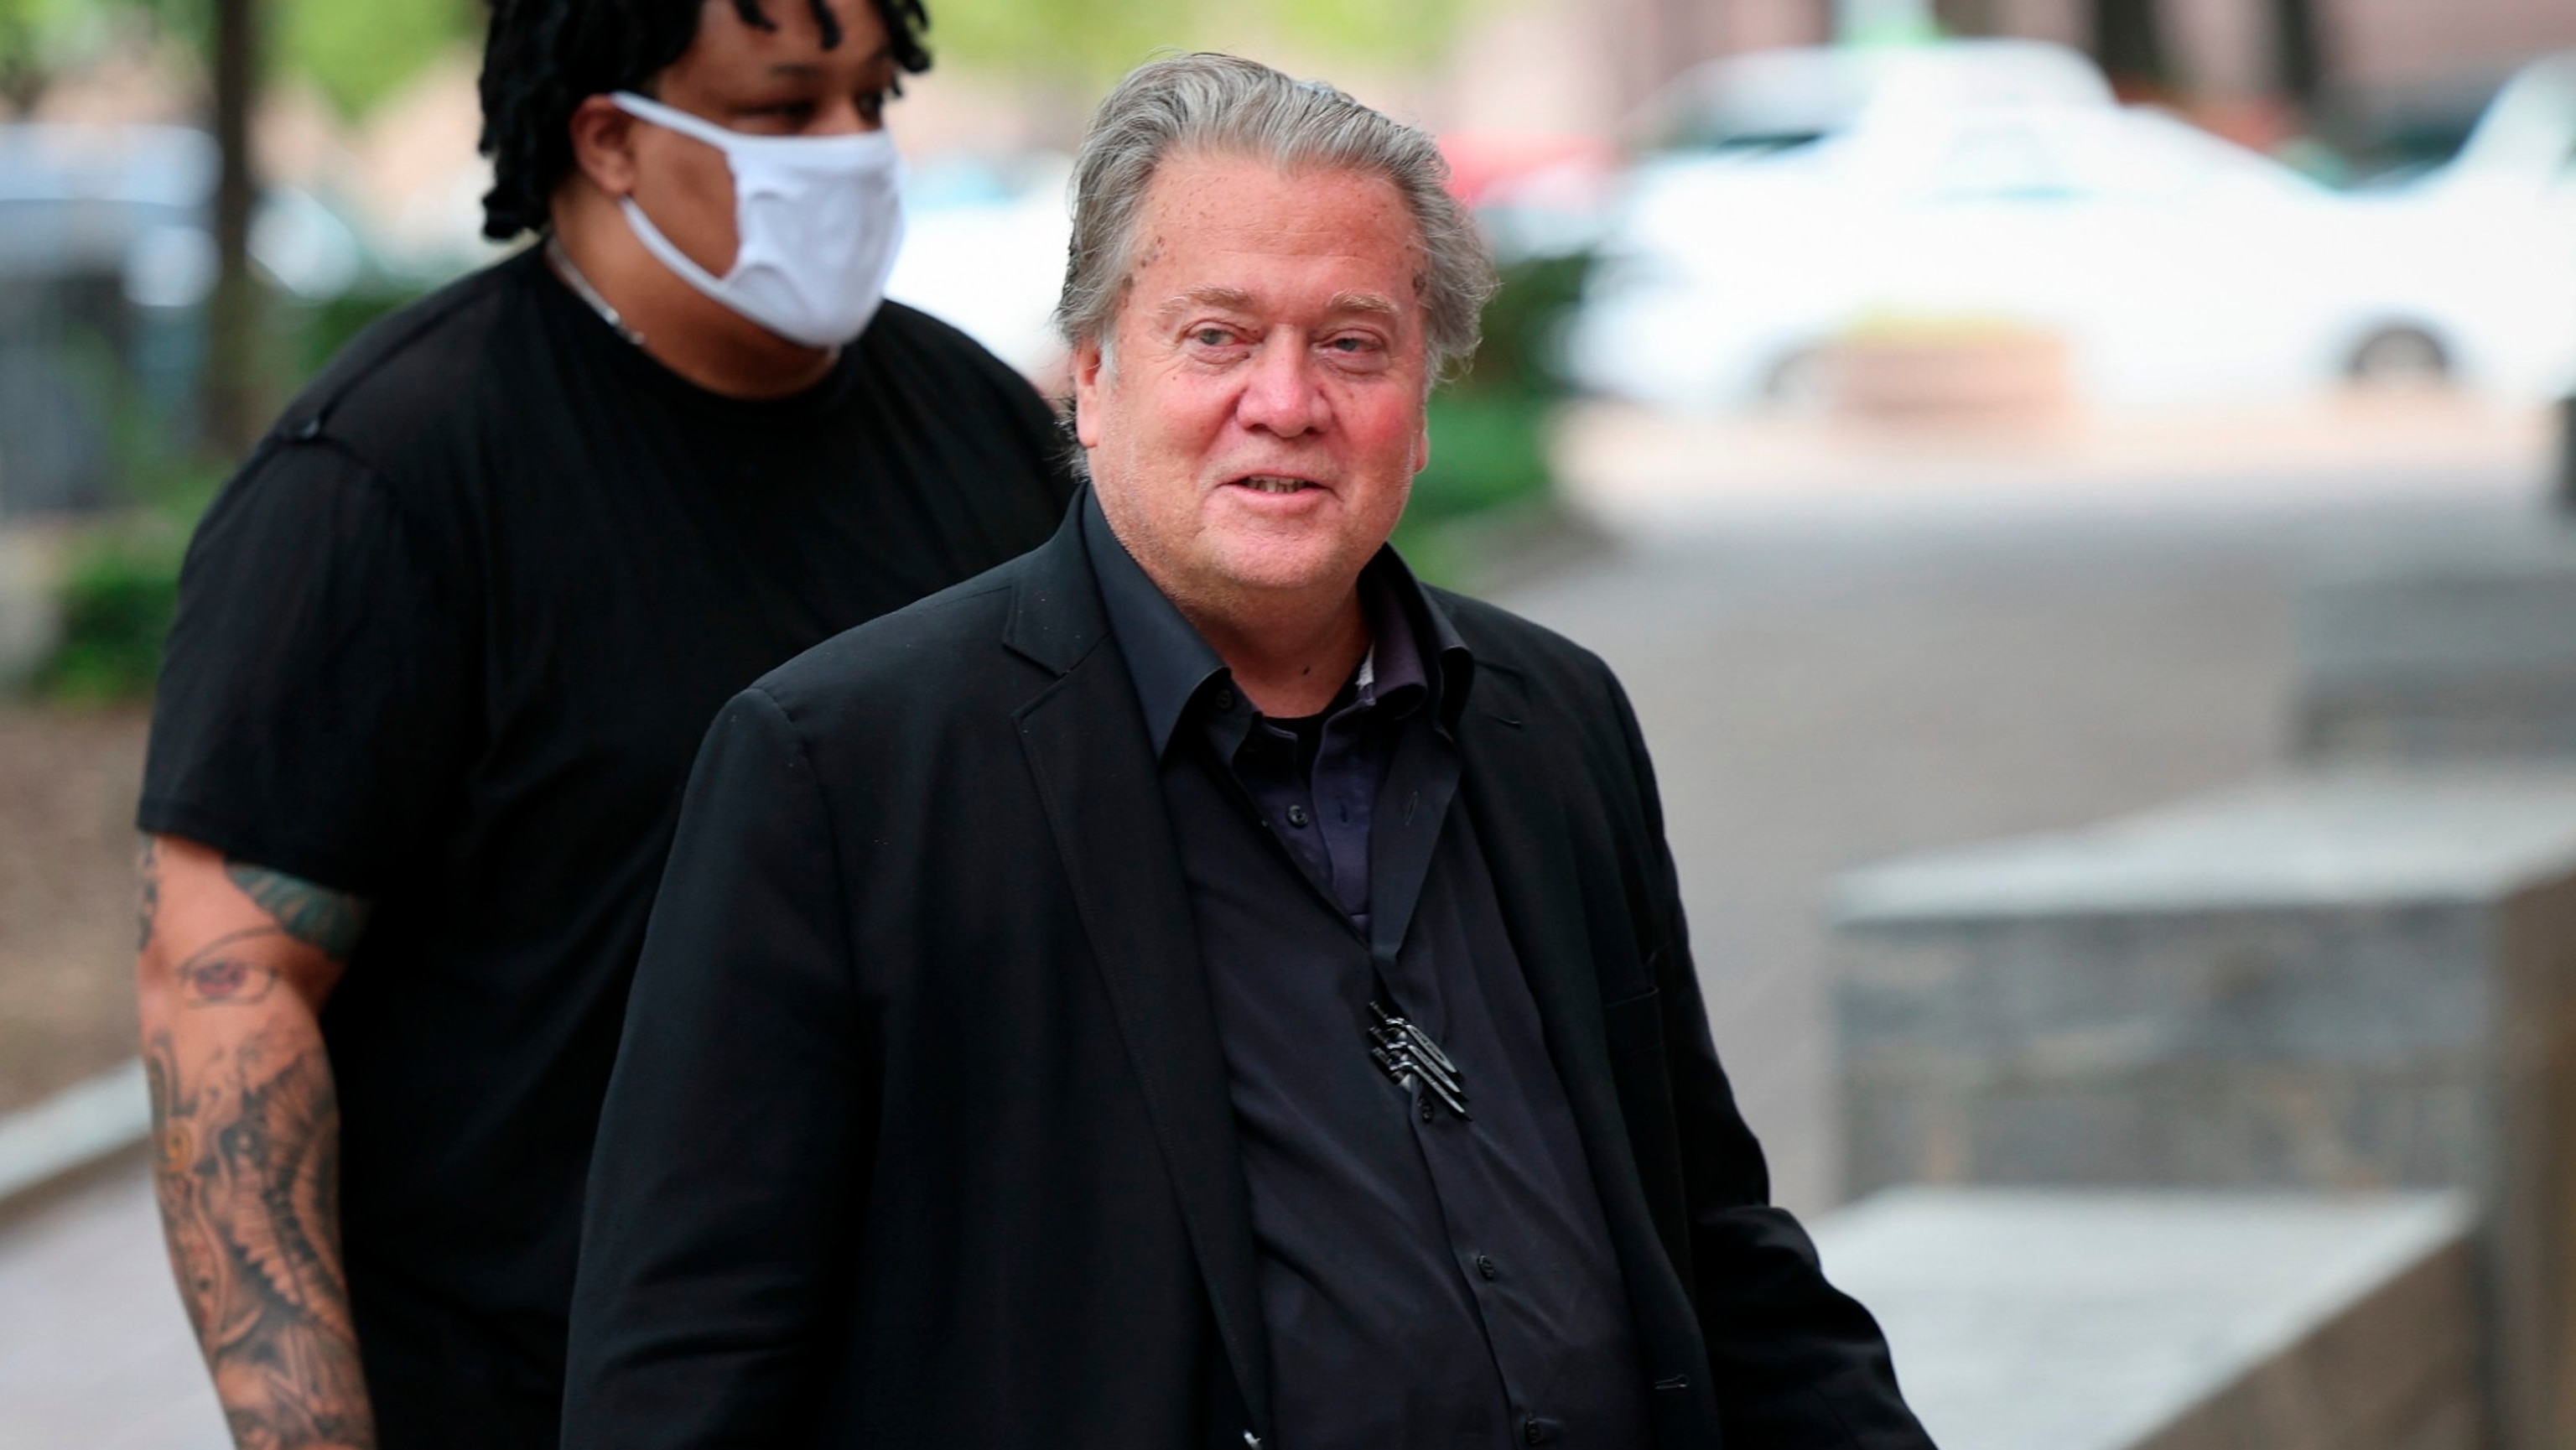 PHOTO: Former White House chief strategist Steve Bannon arrives at the U.S. District Courthouse for his trial for contempt of Congress, on July 19, 2022, in Washington, D.C.